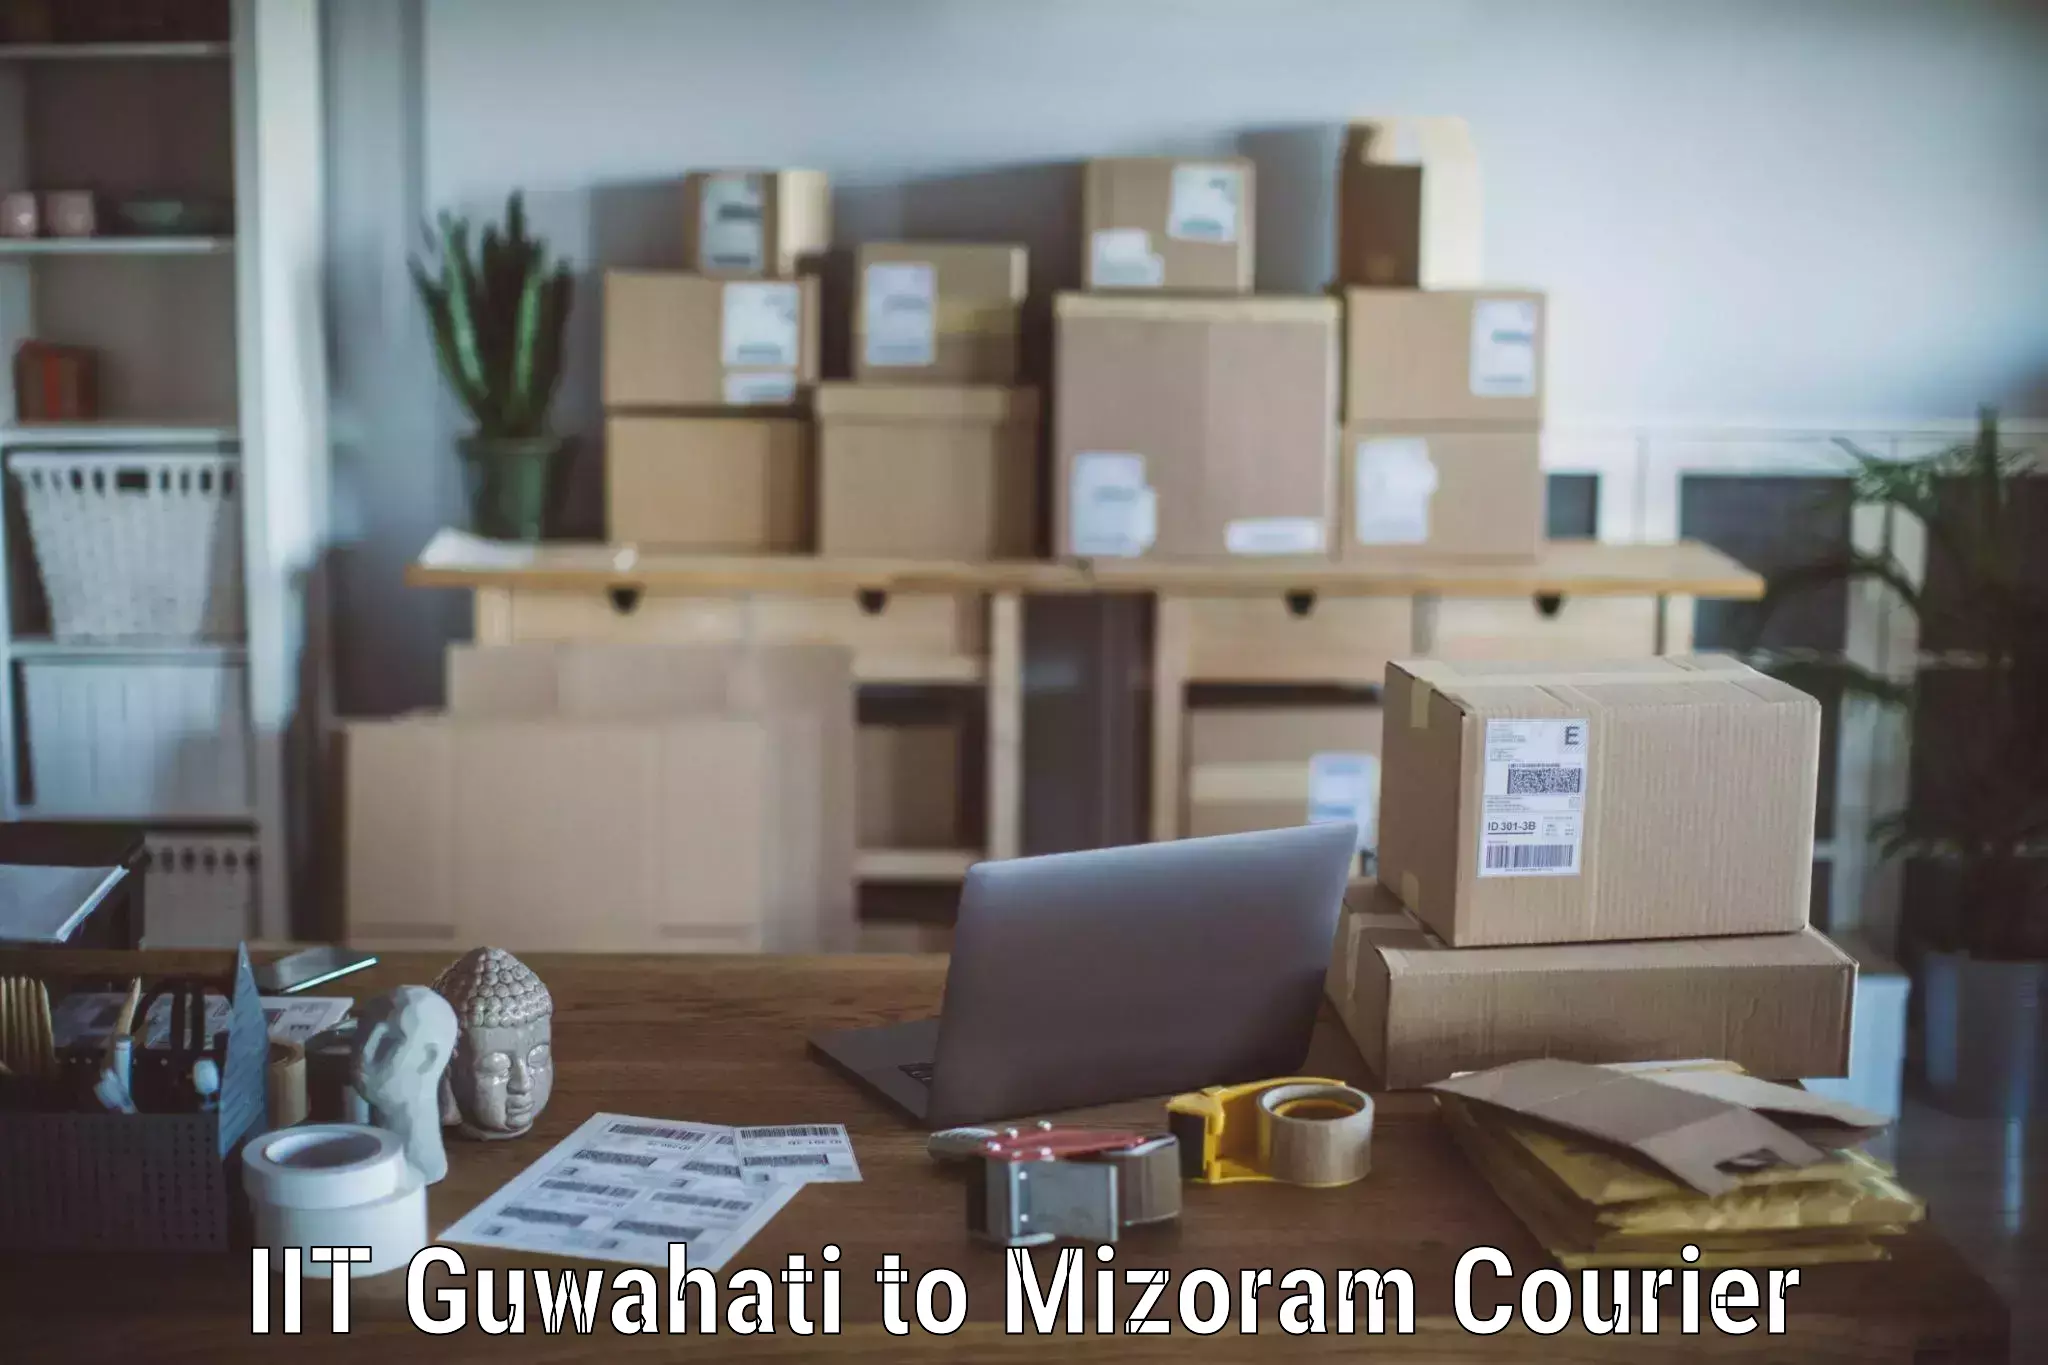 Quality relocation assistance IIT Guwahati to Darlawn